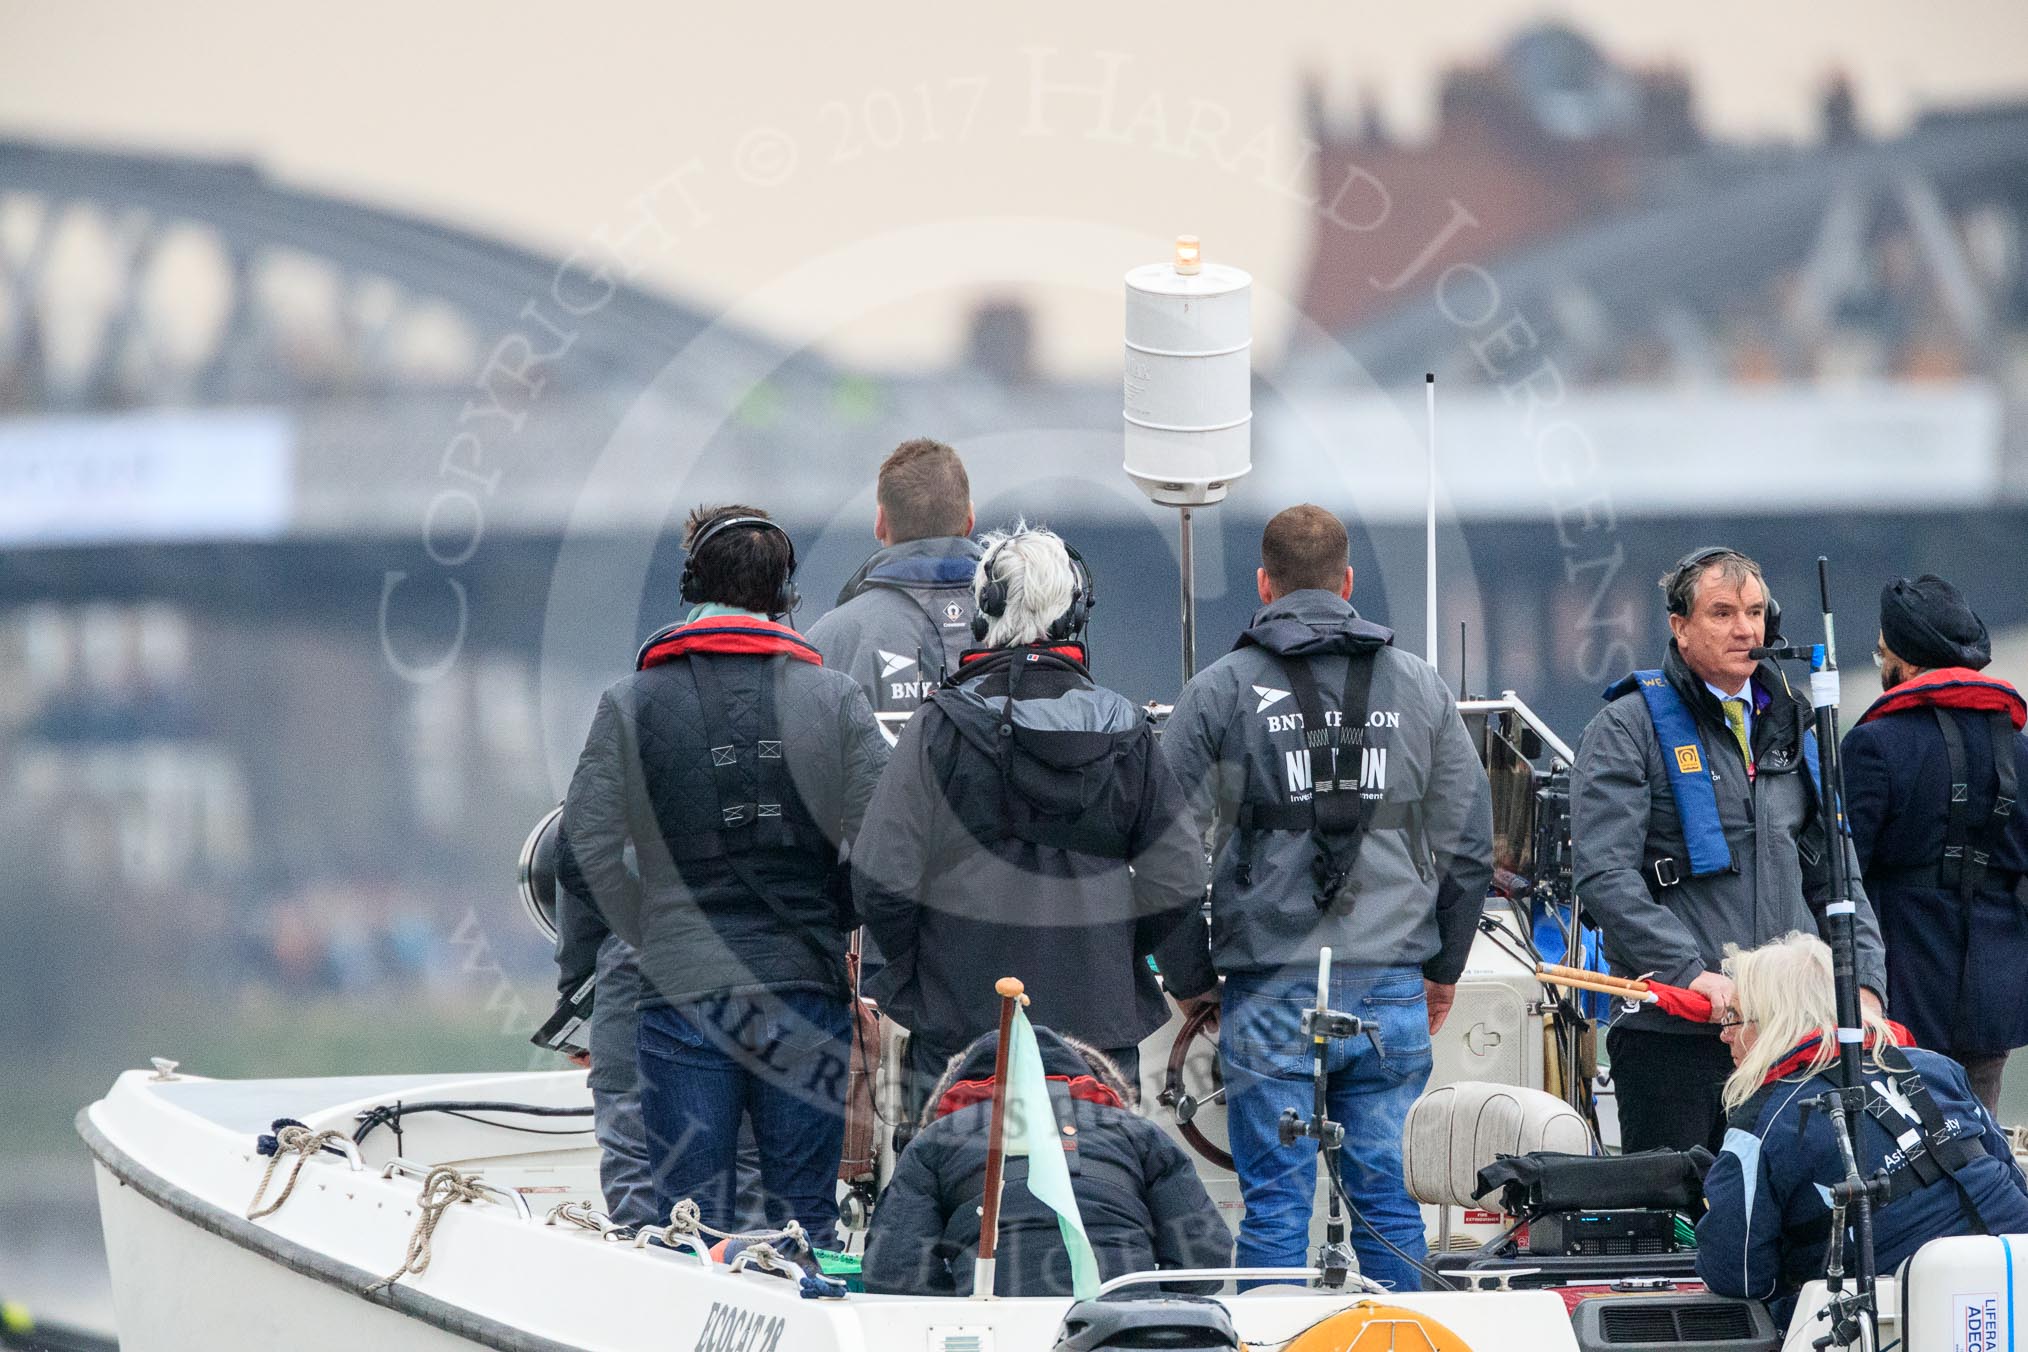 The Cancer Research UK Women's Boat Race 2018: The umpire's launch, with race umpire Sire Matthew Pinsent in front.
River Thames between Putney Bridge and Mortlake,
London SW15,

United Kingdom,
on 24 March 2018 at 16:46, image #195